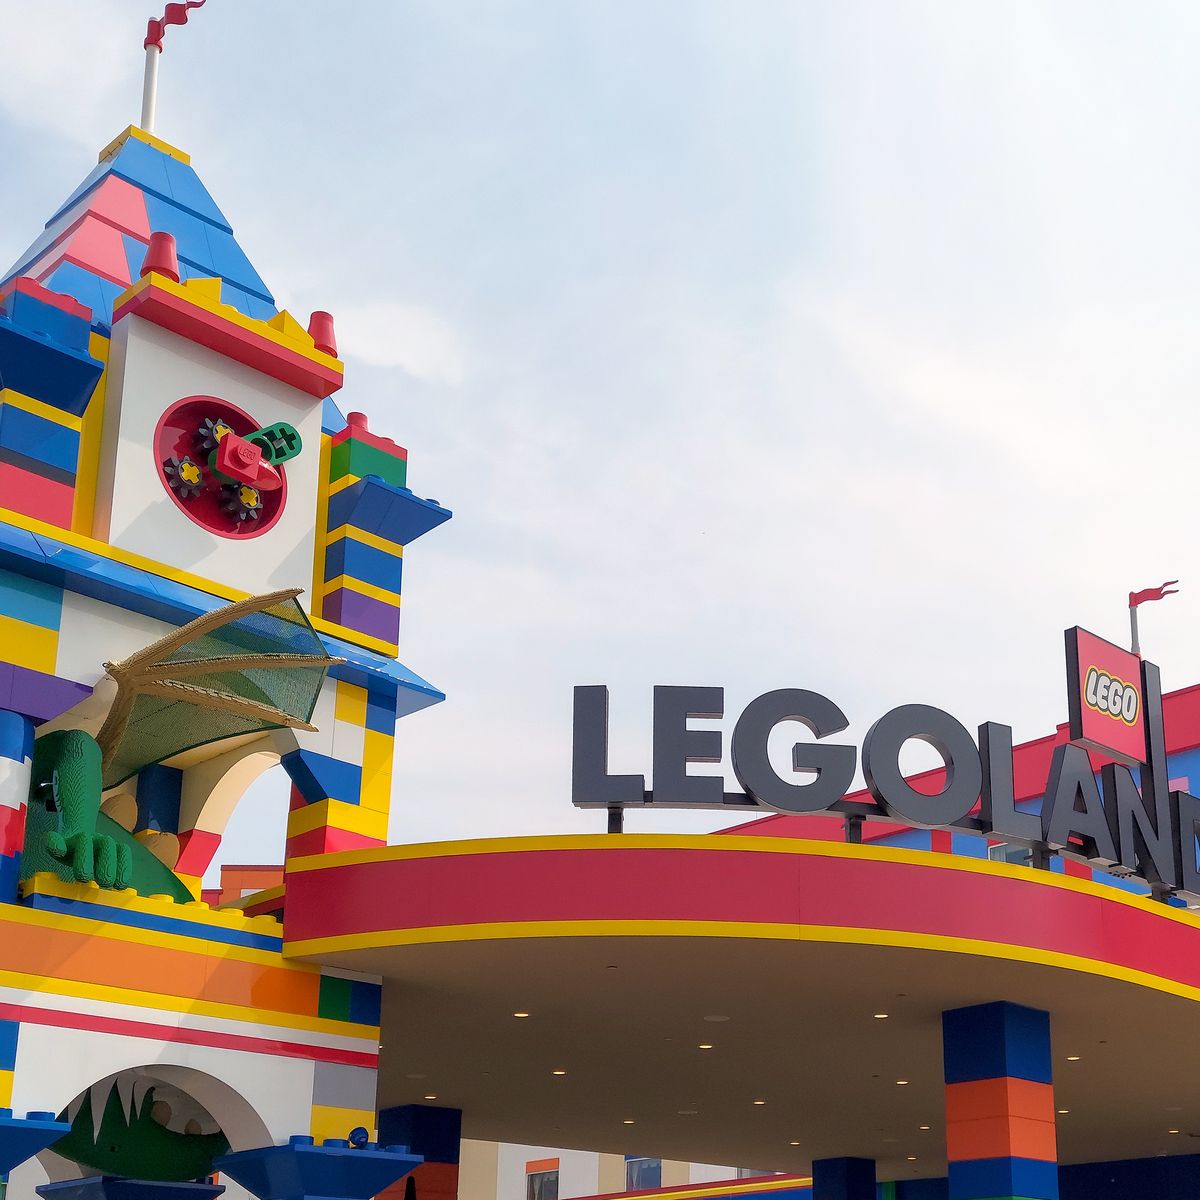 Legoland New York Hotel Review: What to Know Before You to Goshen, NY